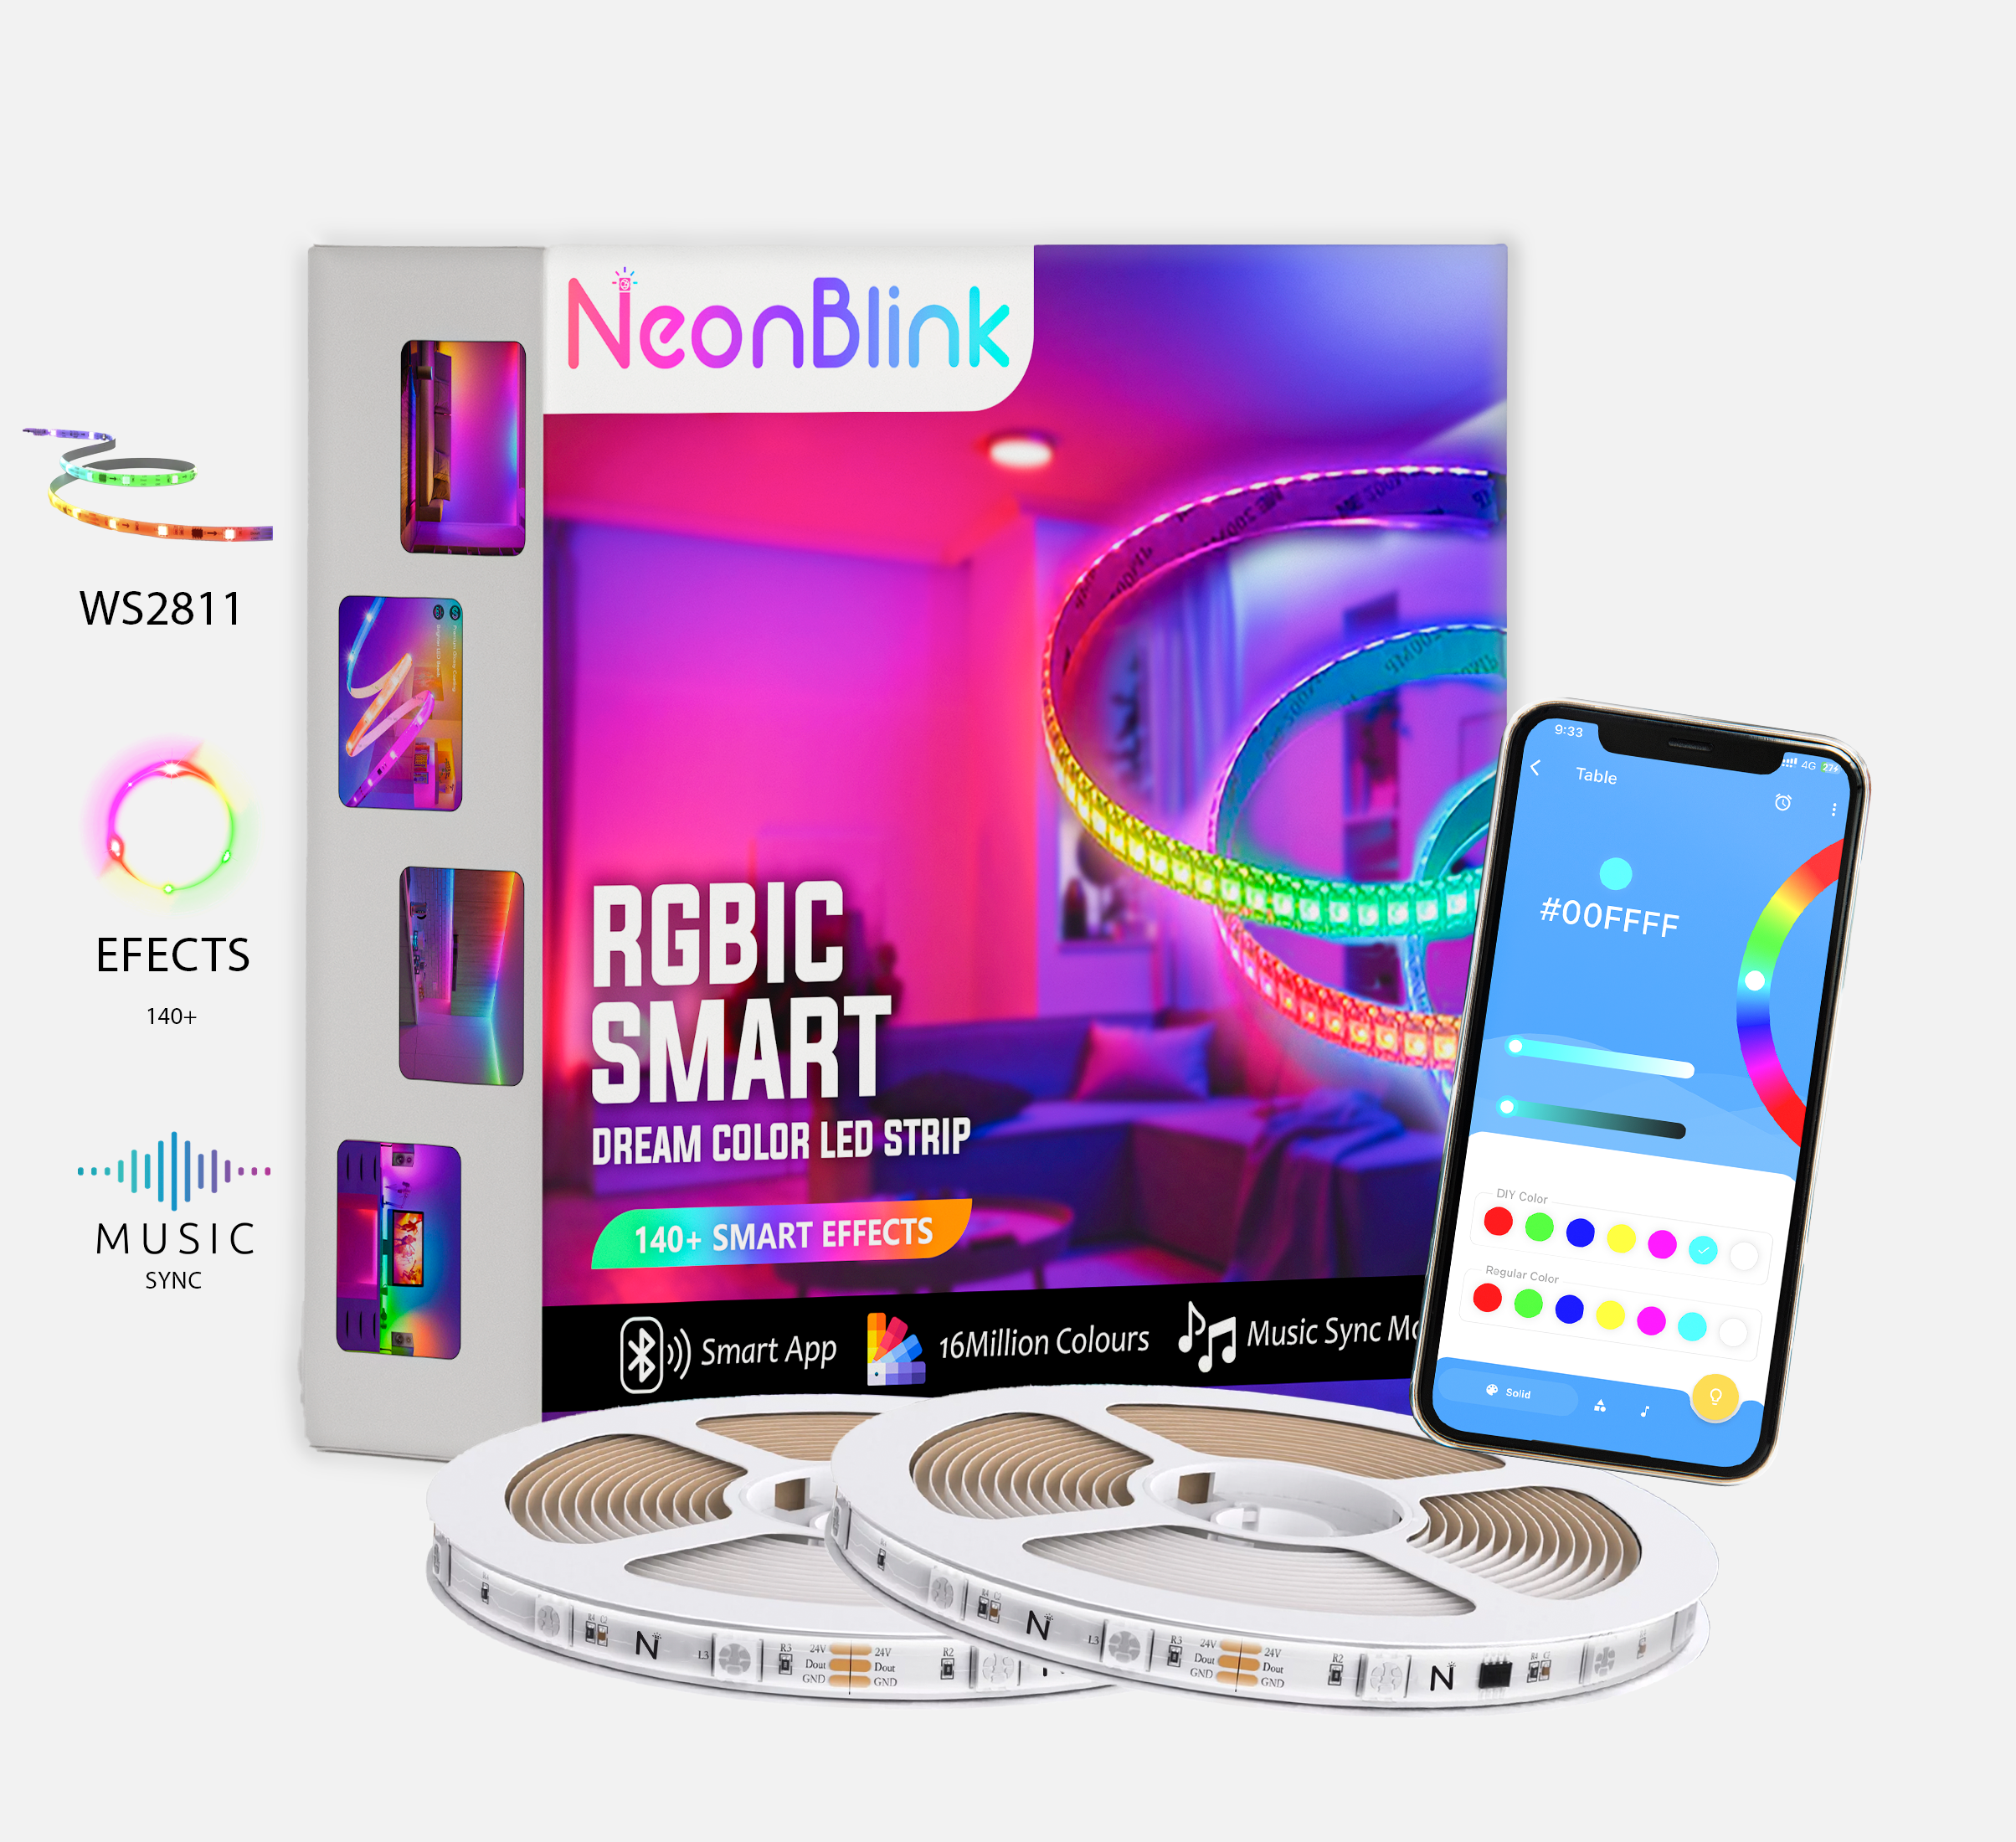 NeonBlink RGBIC LED Strip Kit With Music Sync & App Support - WS2811